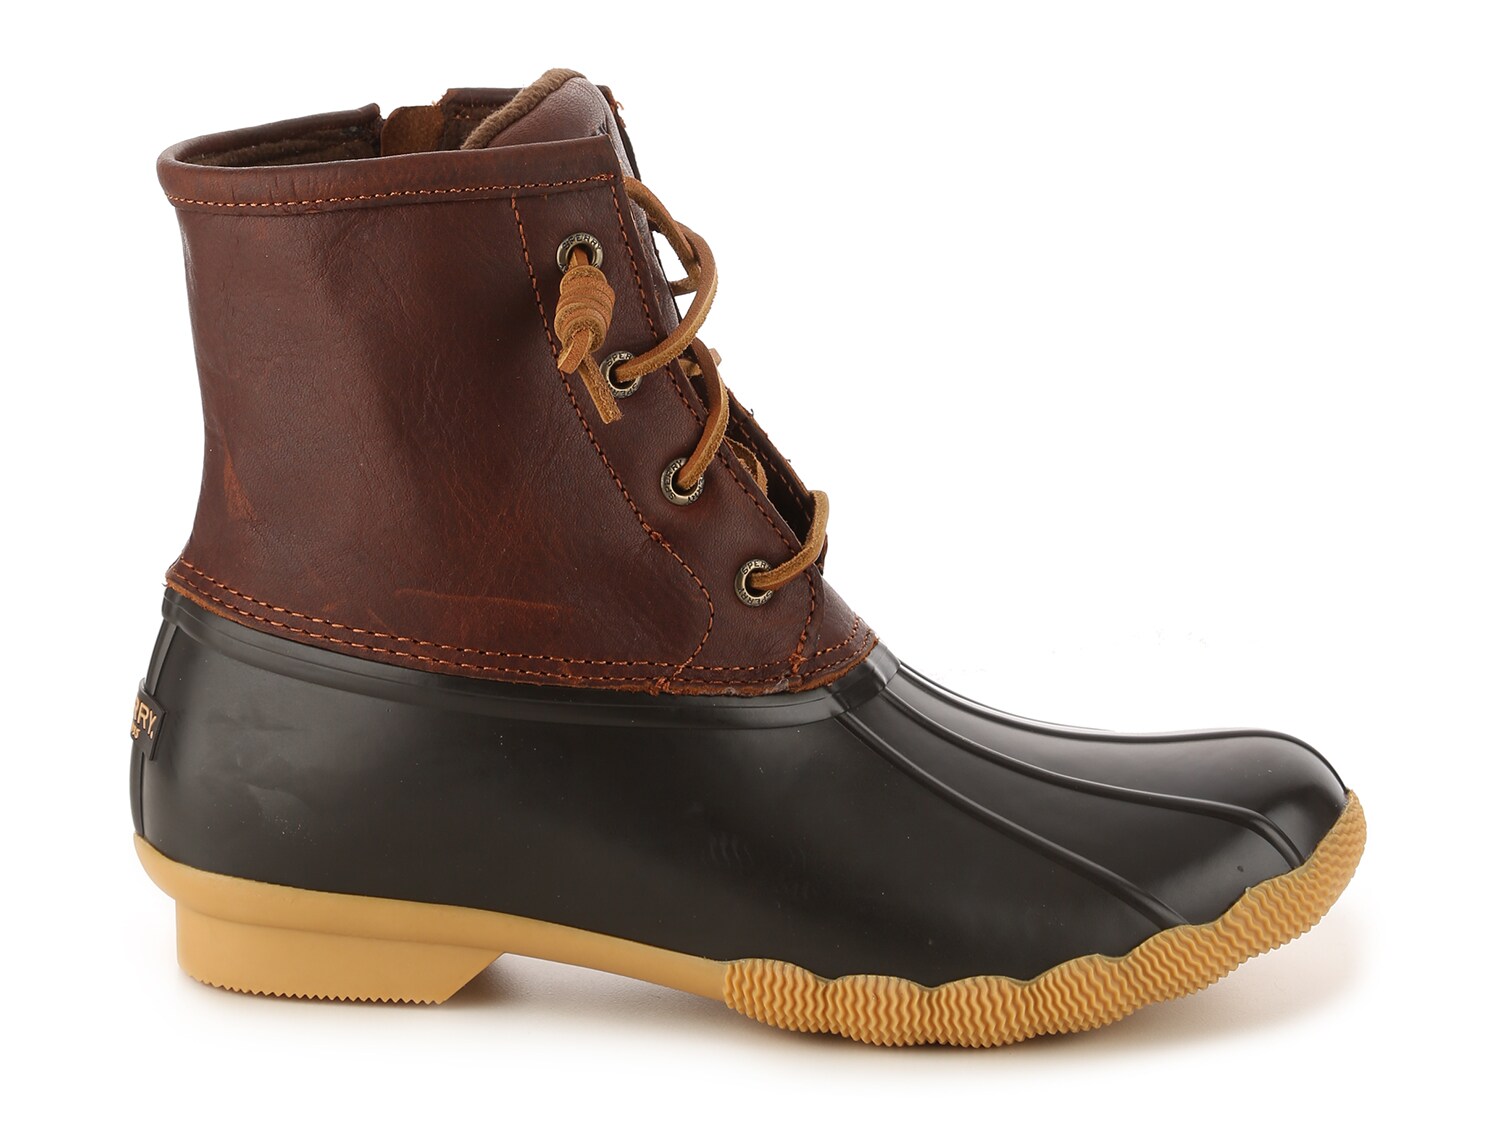 Sperry Saltwater Leather Duck Boot | DSW